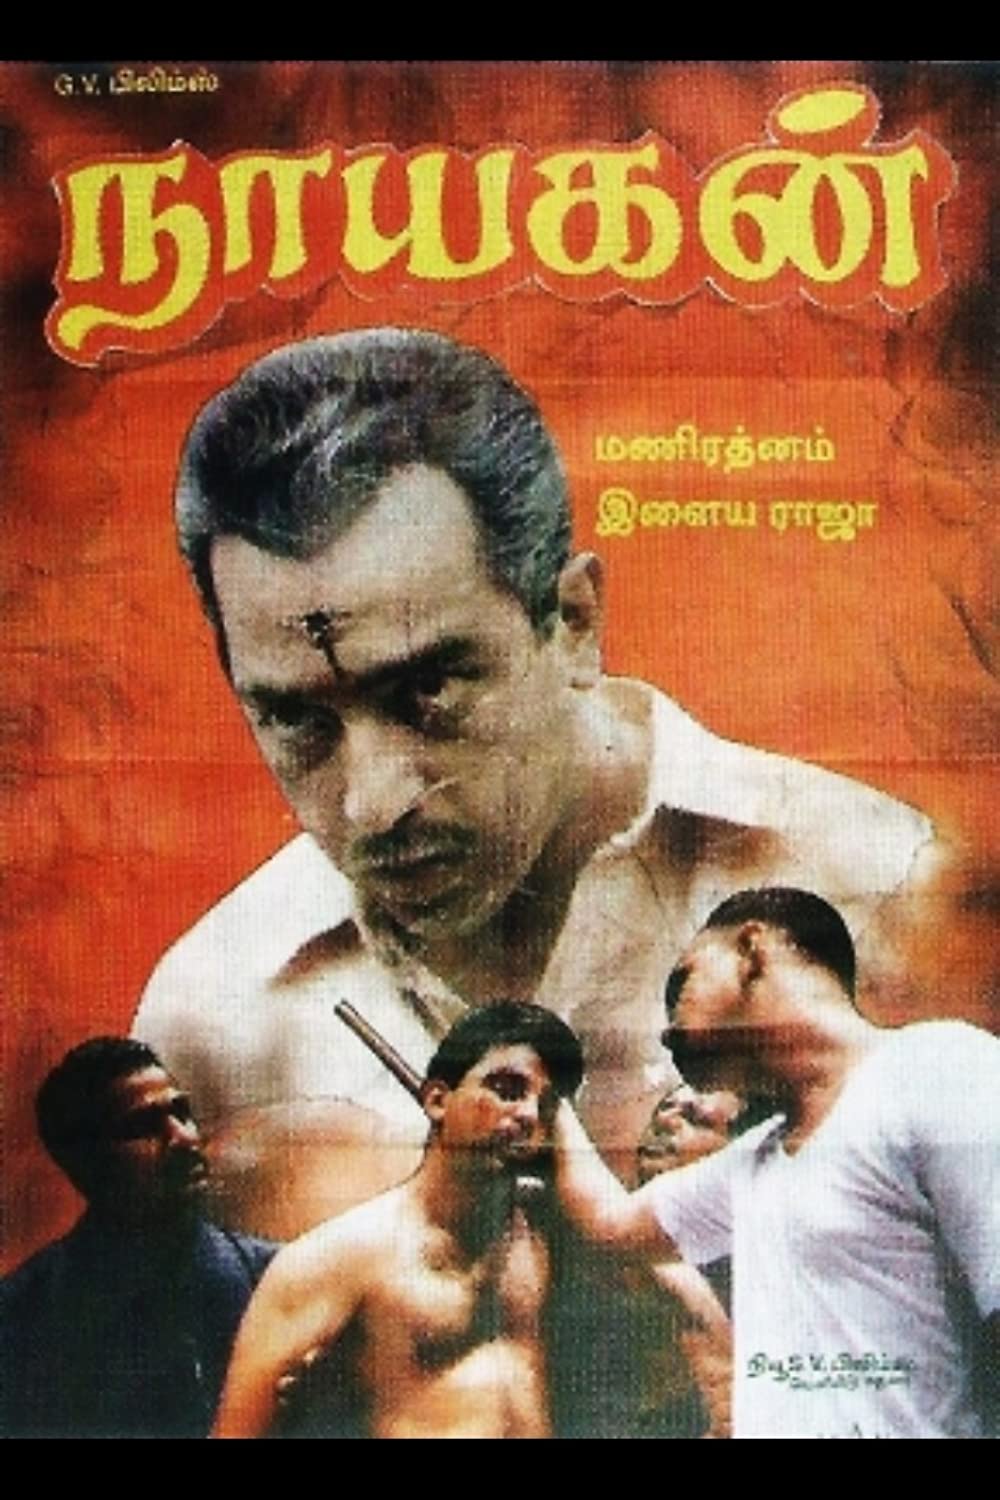 Nayakan, directed by Mani Ratnam, is my favourite Indian gangster film. 